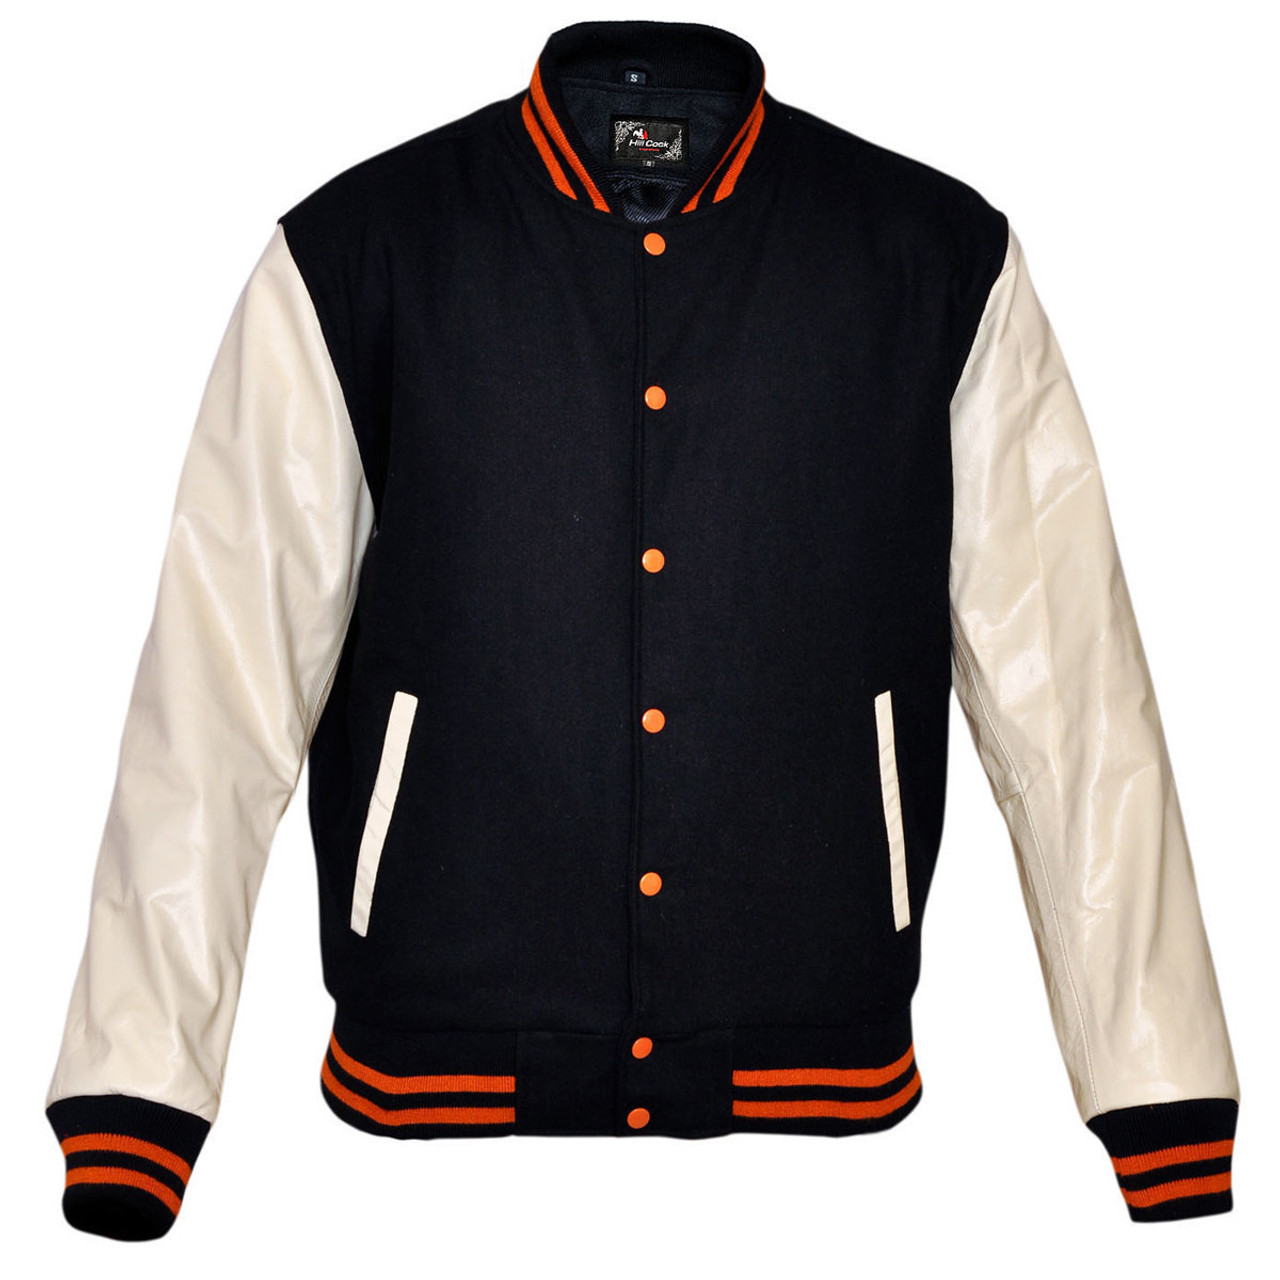 Men's Red Wool Varsity Jacket with Black Leather Sleeves - Baseball Style  *Ends Soon*